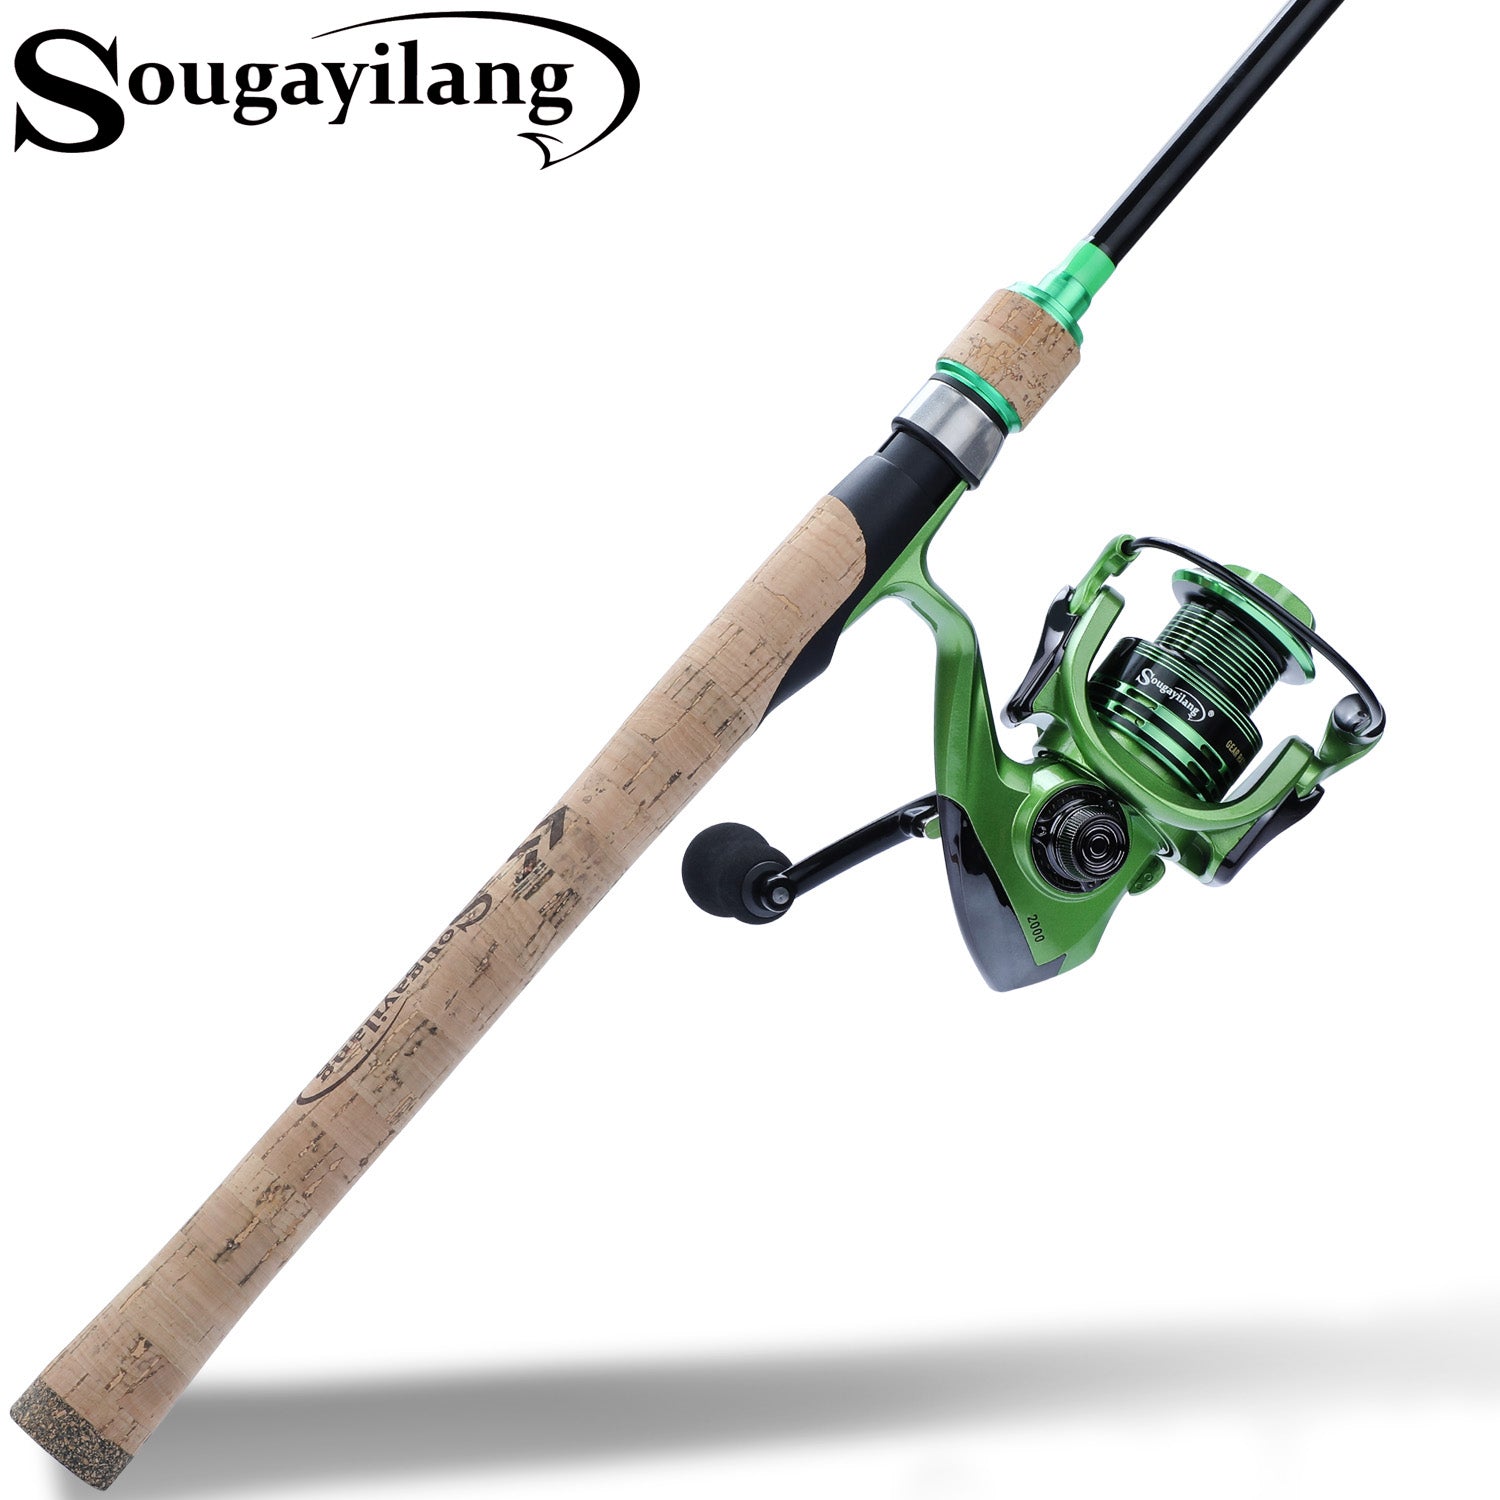 Sougayilang Spinning Combo Fishing Rod & Reel Combos for sale